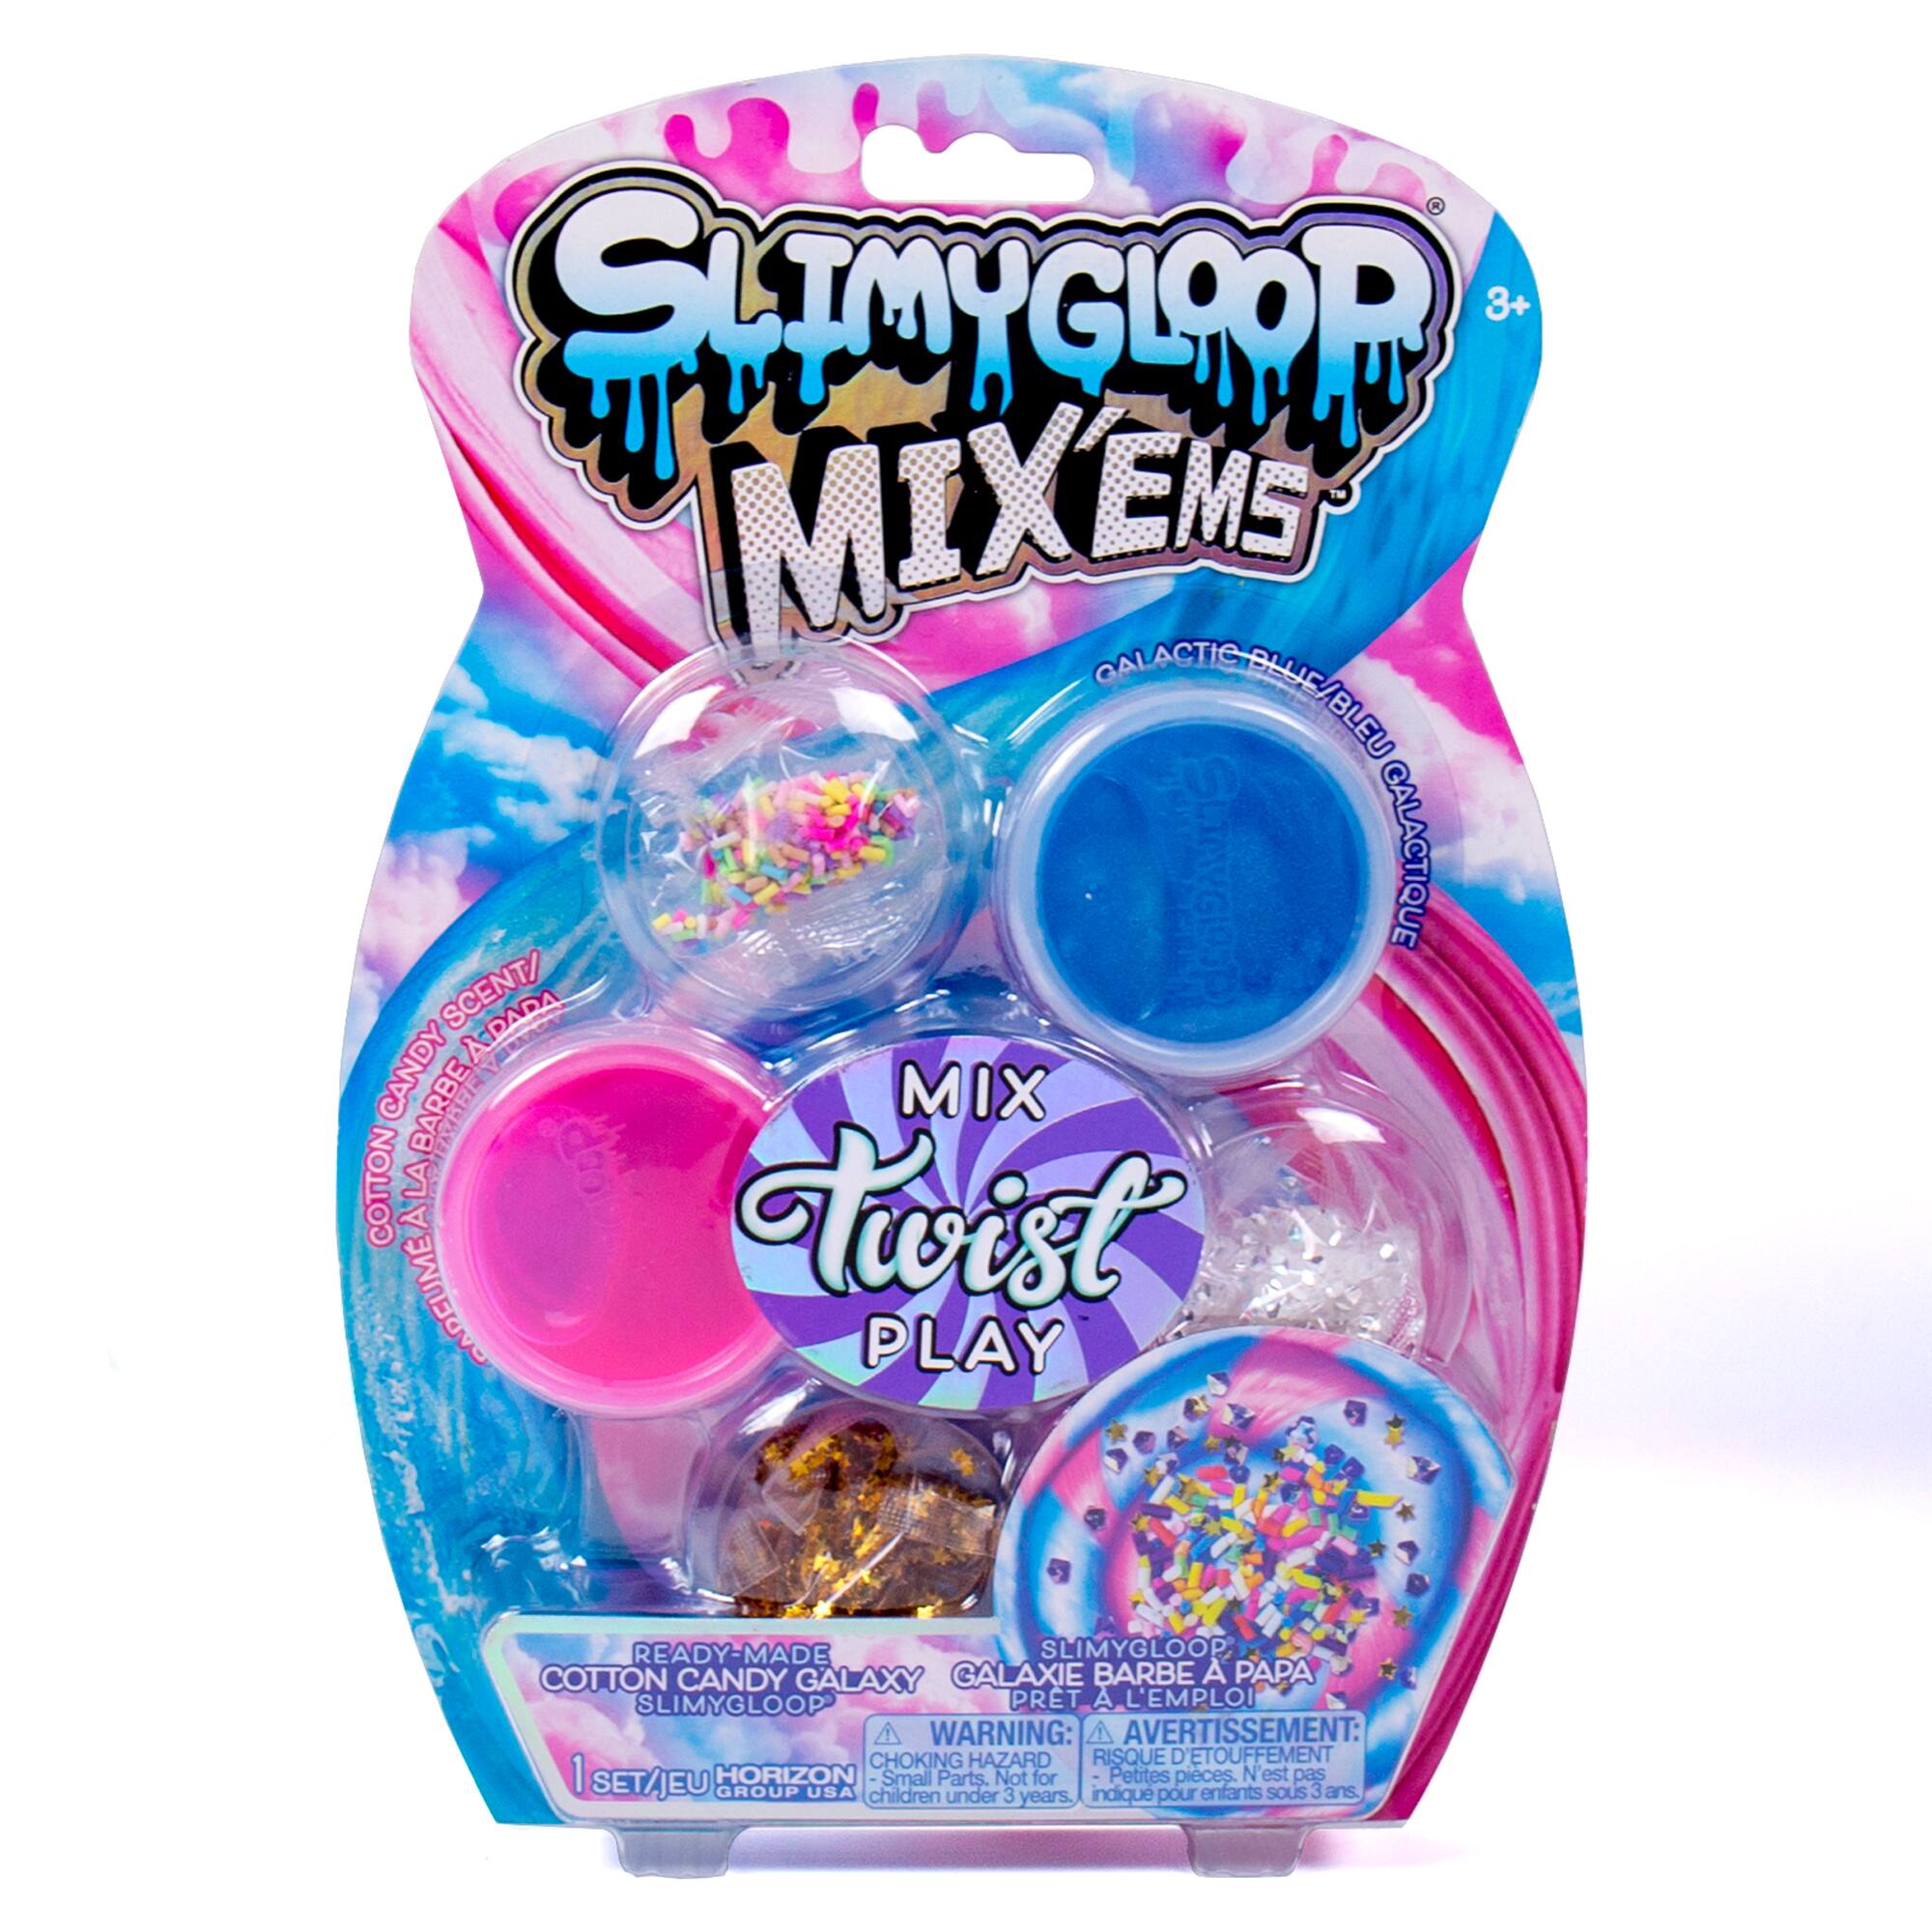 Scented Cloud Slime Slimygloop Mixems Twists Cotton Candy Galaxy Sprinkles Add-Ins Metallic Slime Glitter by Horizon Group USA Embellishments multicolor